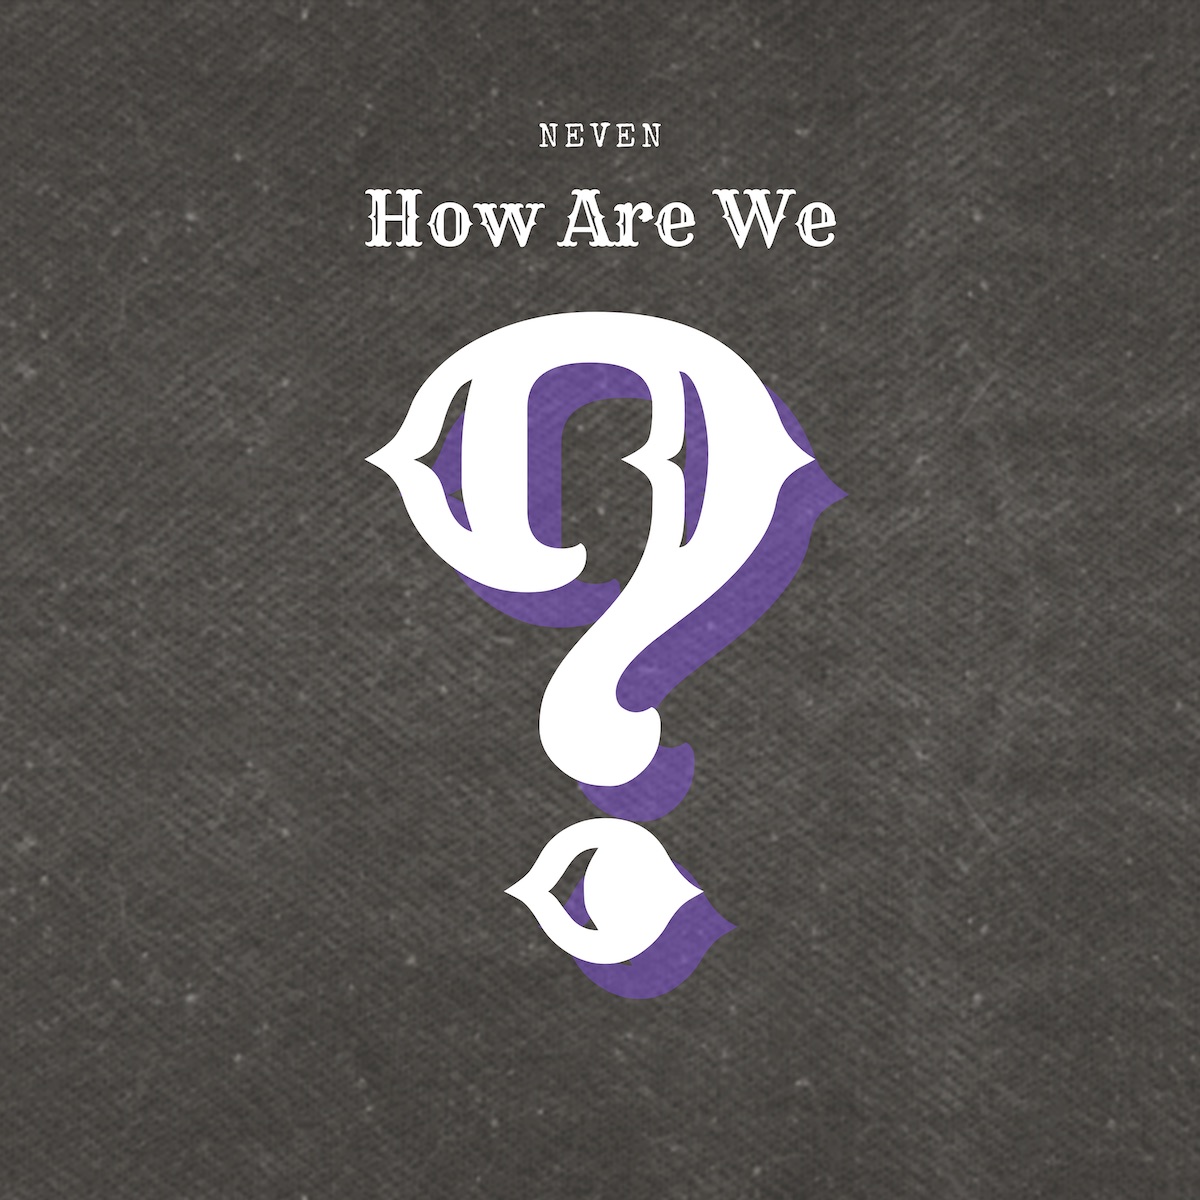 LISTEN: “How Are We?” by Neven